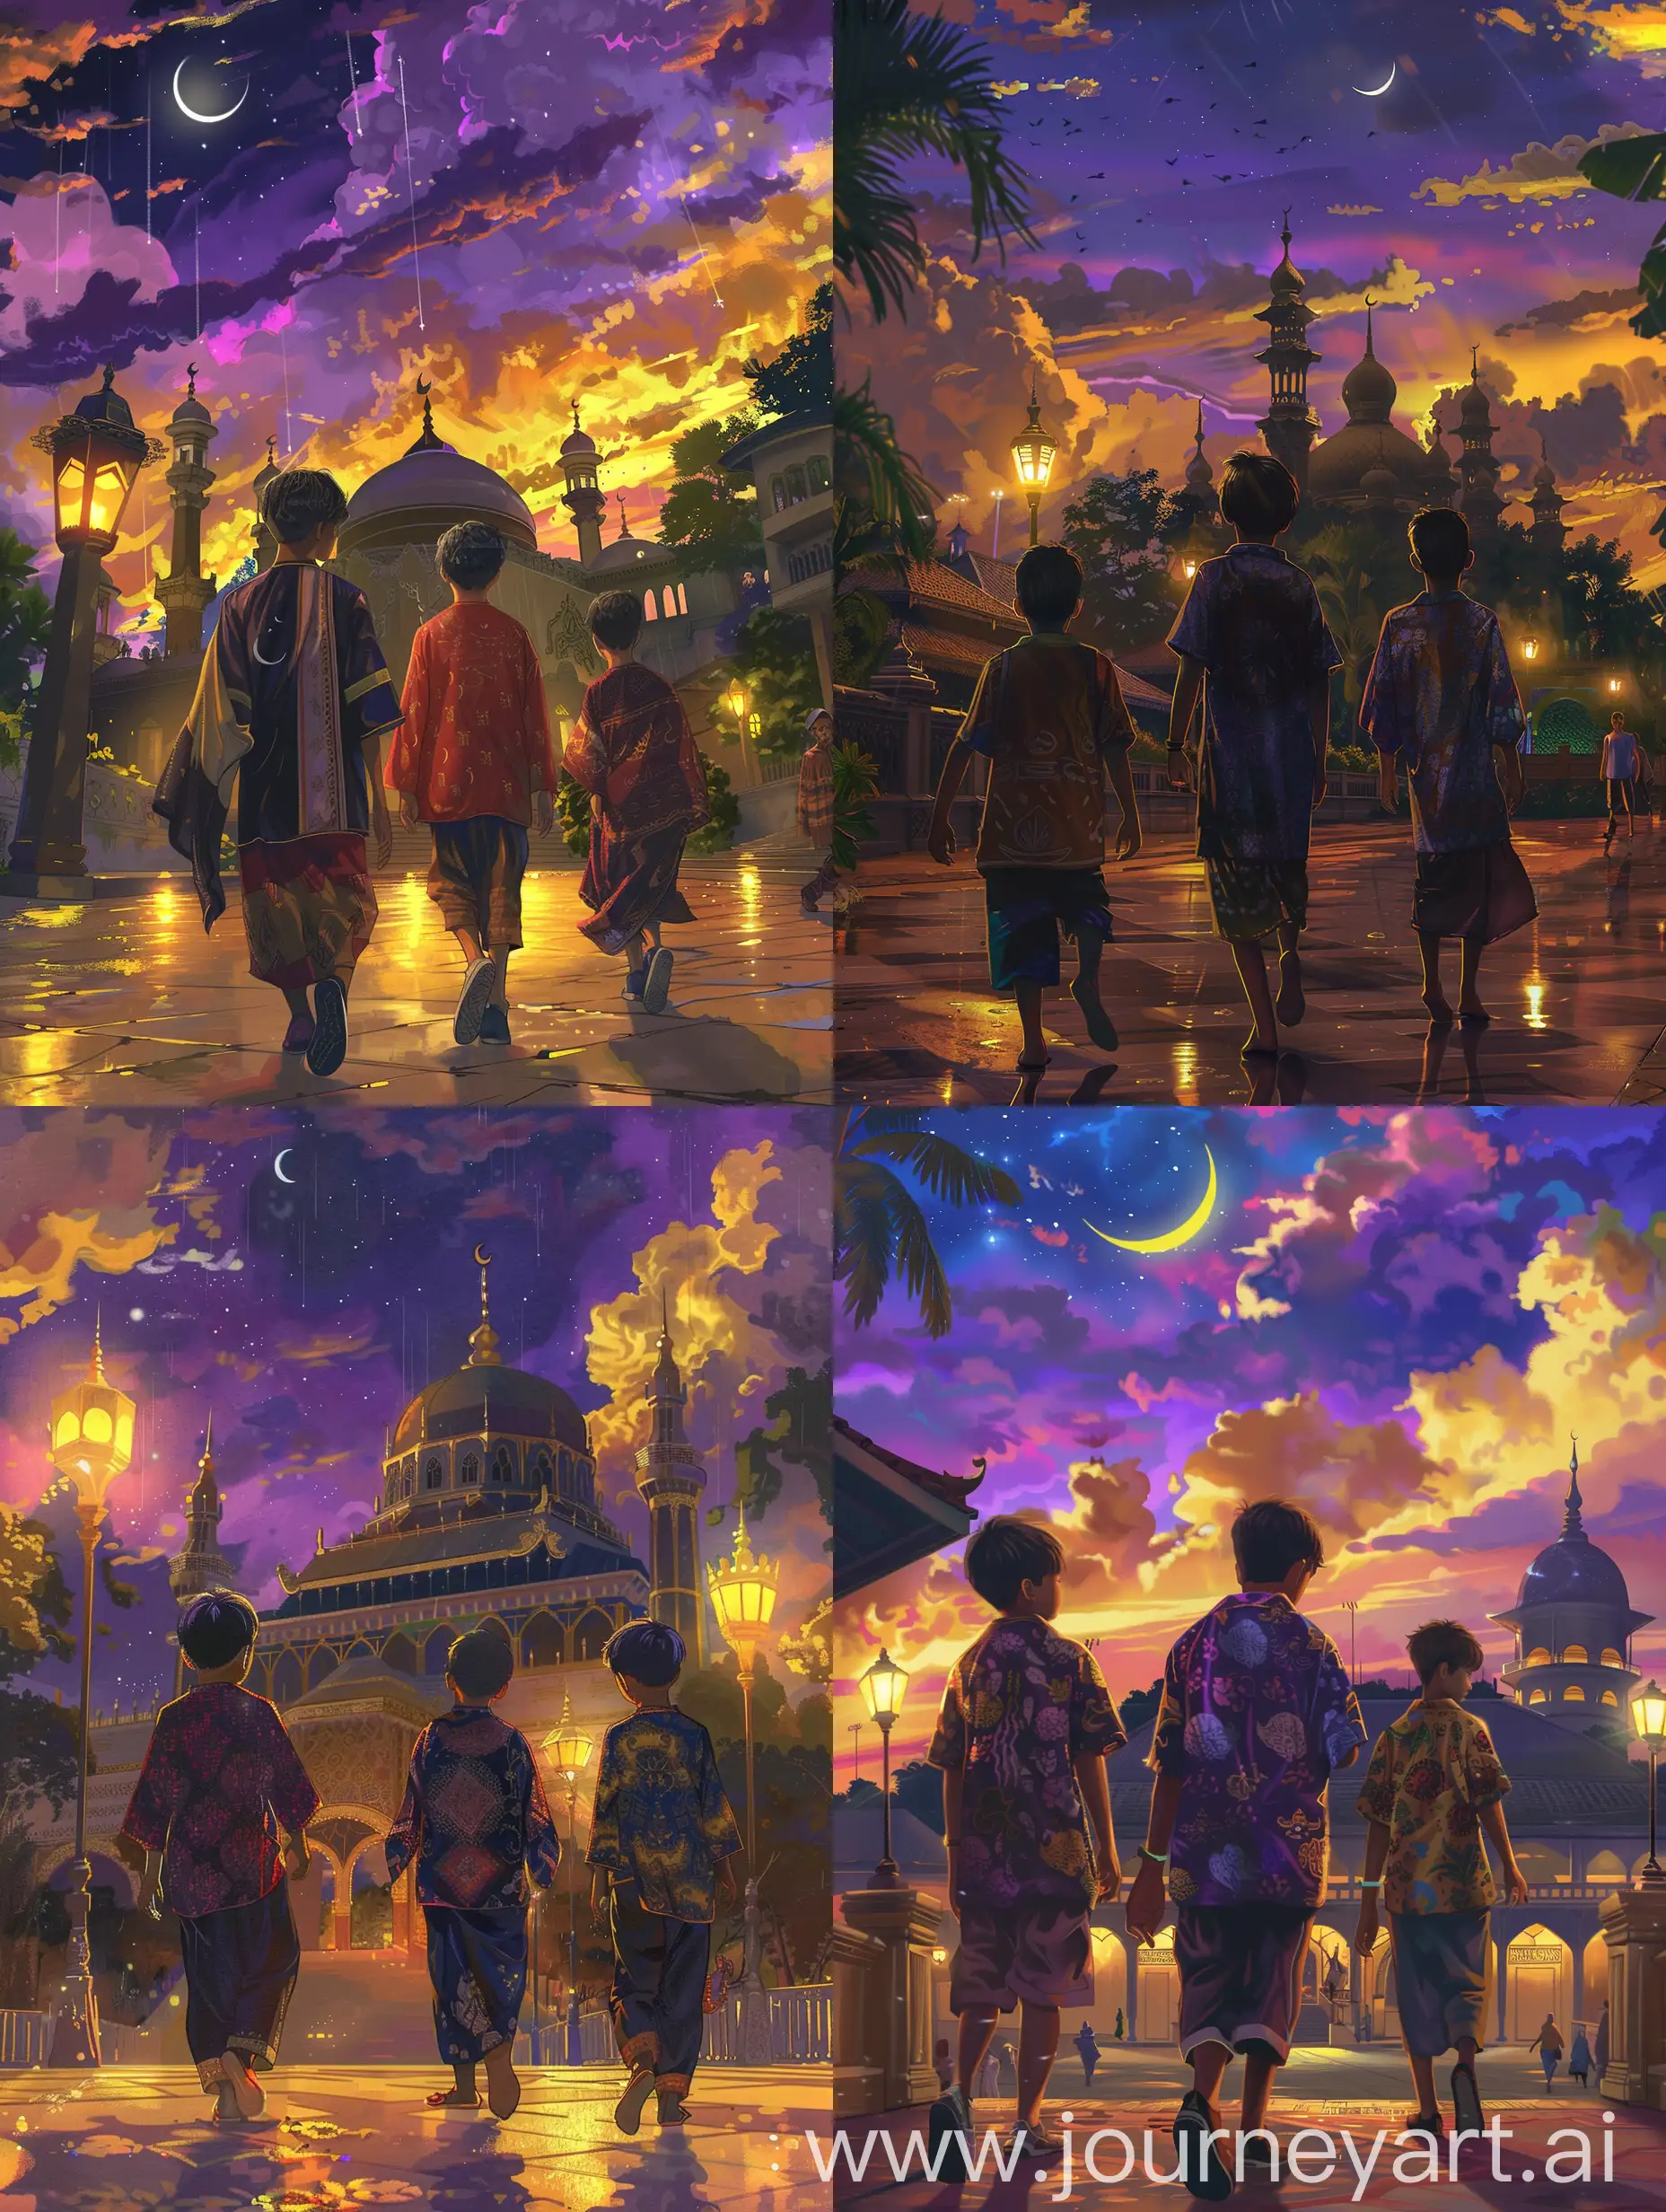 ultra realistic. Three teenage boys wearing sonkok and malay clothes walking towards the mosque. The atmosphere is night and the sky has purple and yellow clouds. there is a crescent moon. the mosque is illuminated by lamplight.